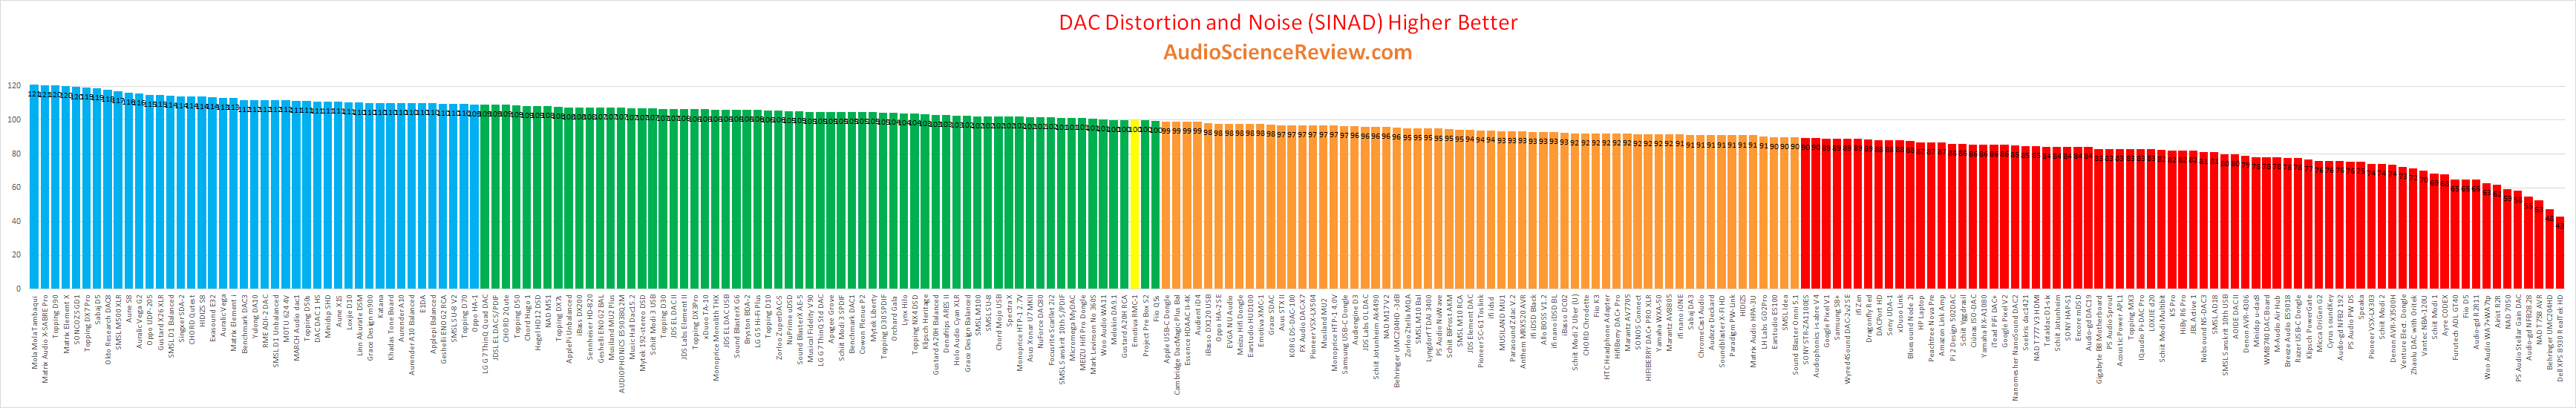 Best Audio DAC Reviewed 2020.png